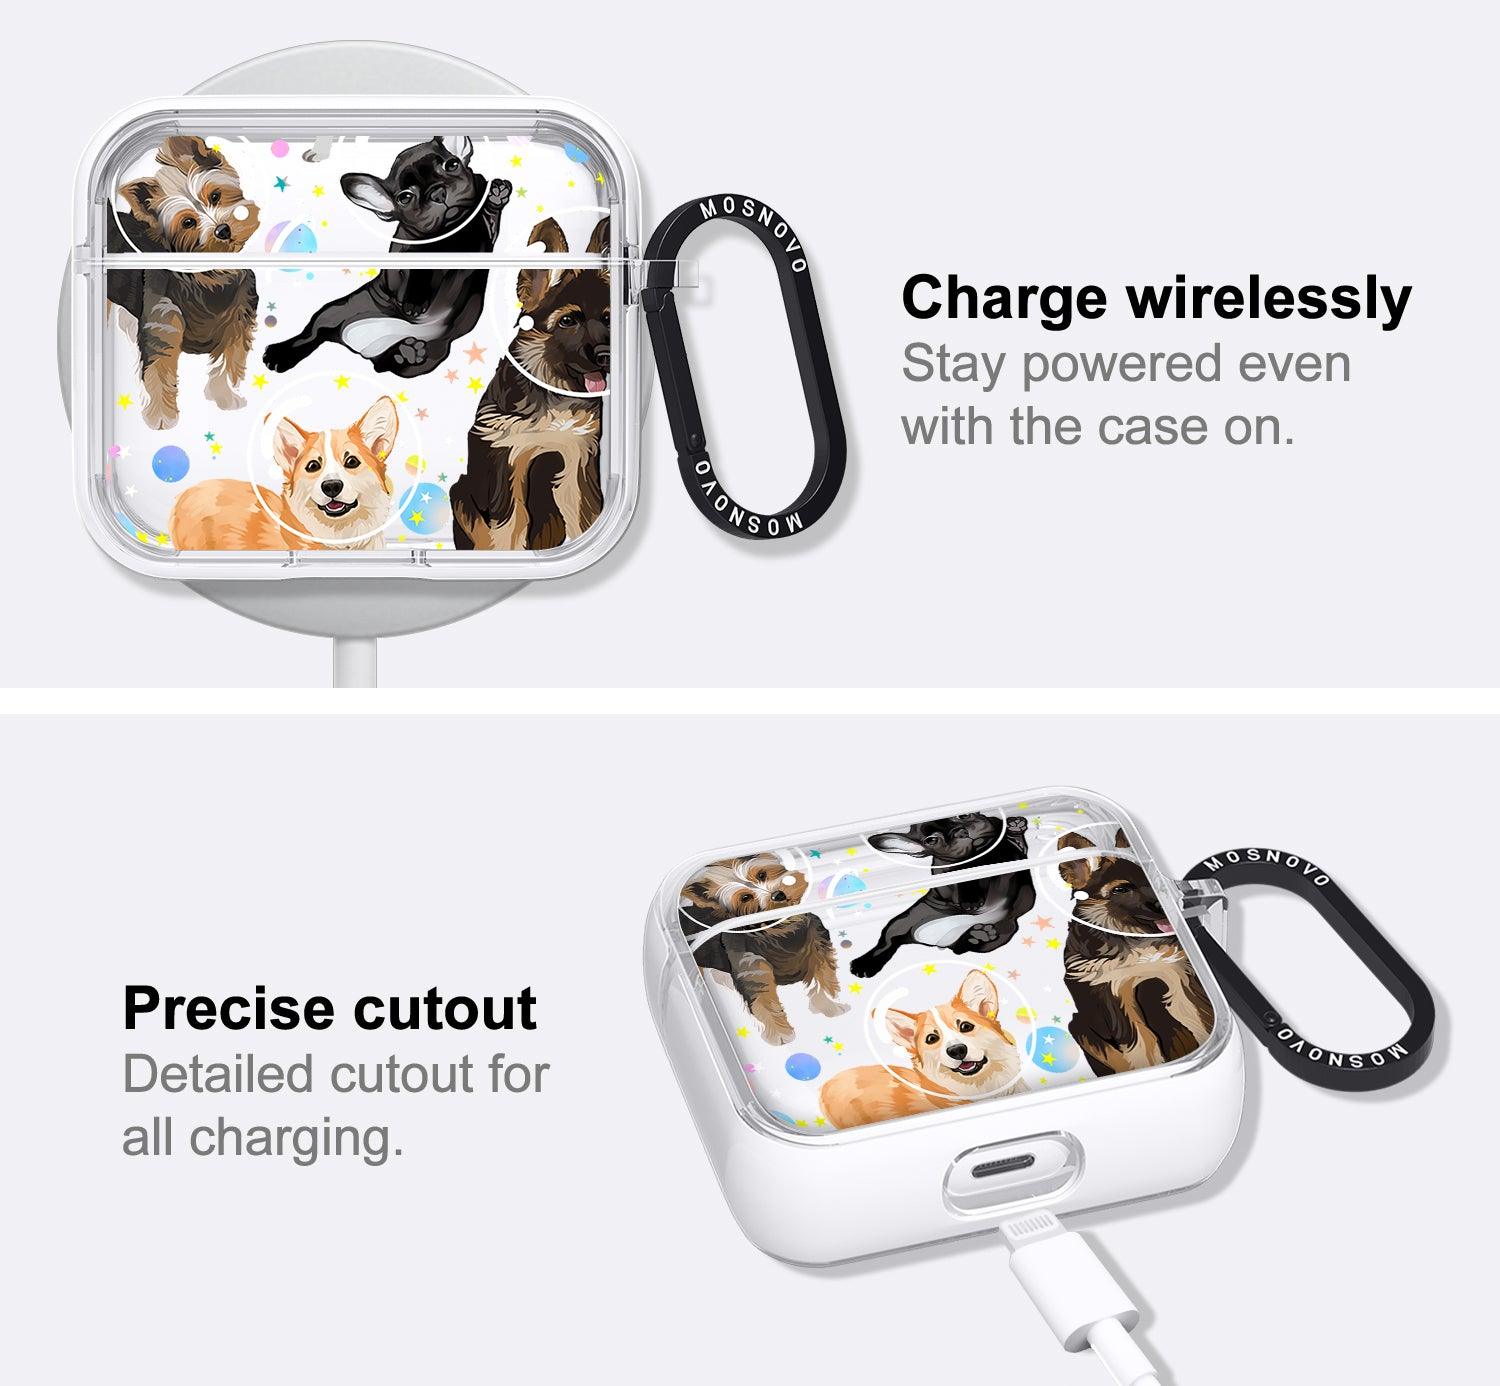 Space Dog AirPods 3 Case (3rd Generation) - MOSNOVO